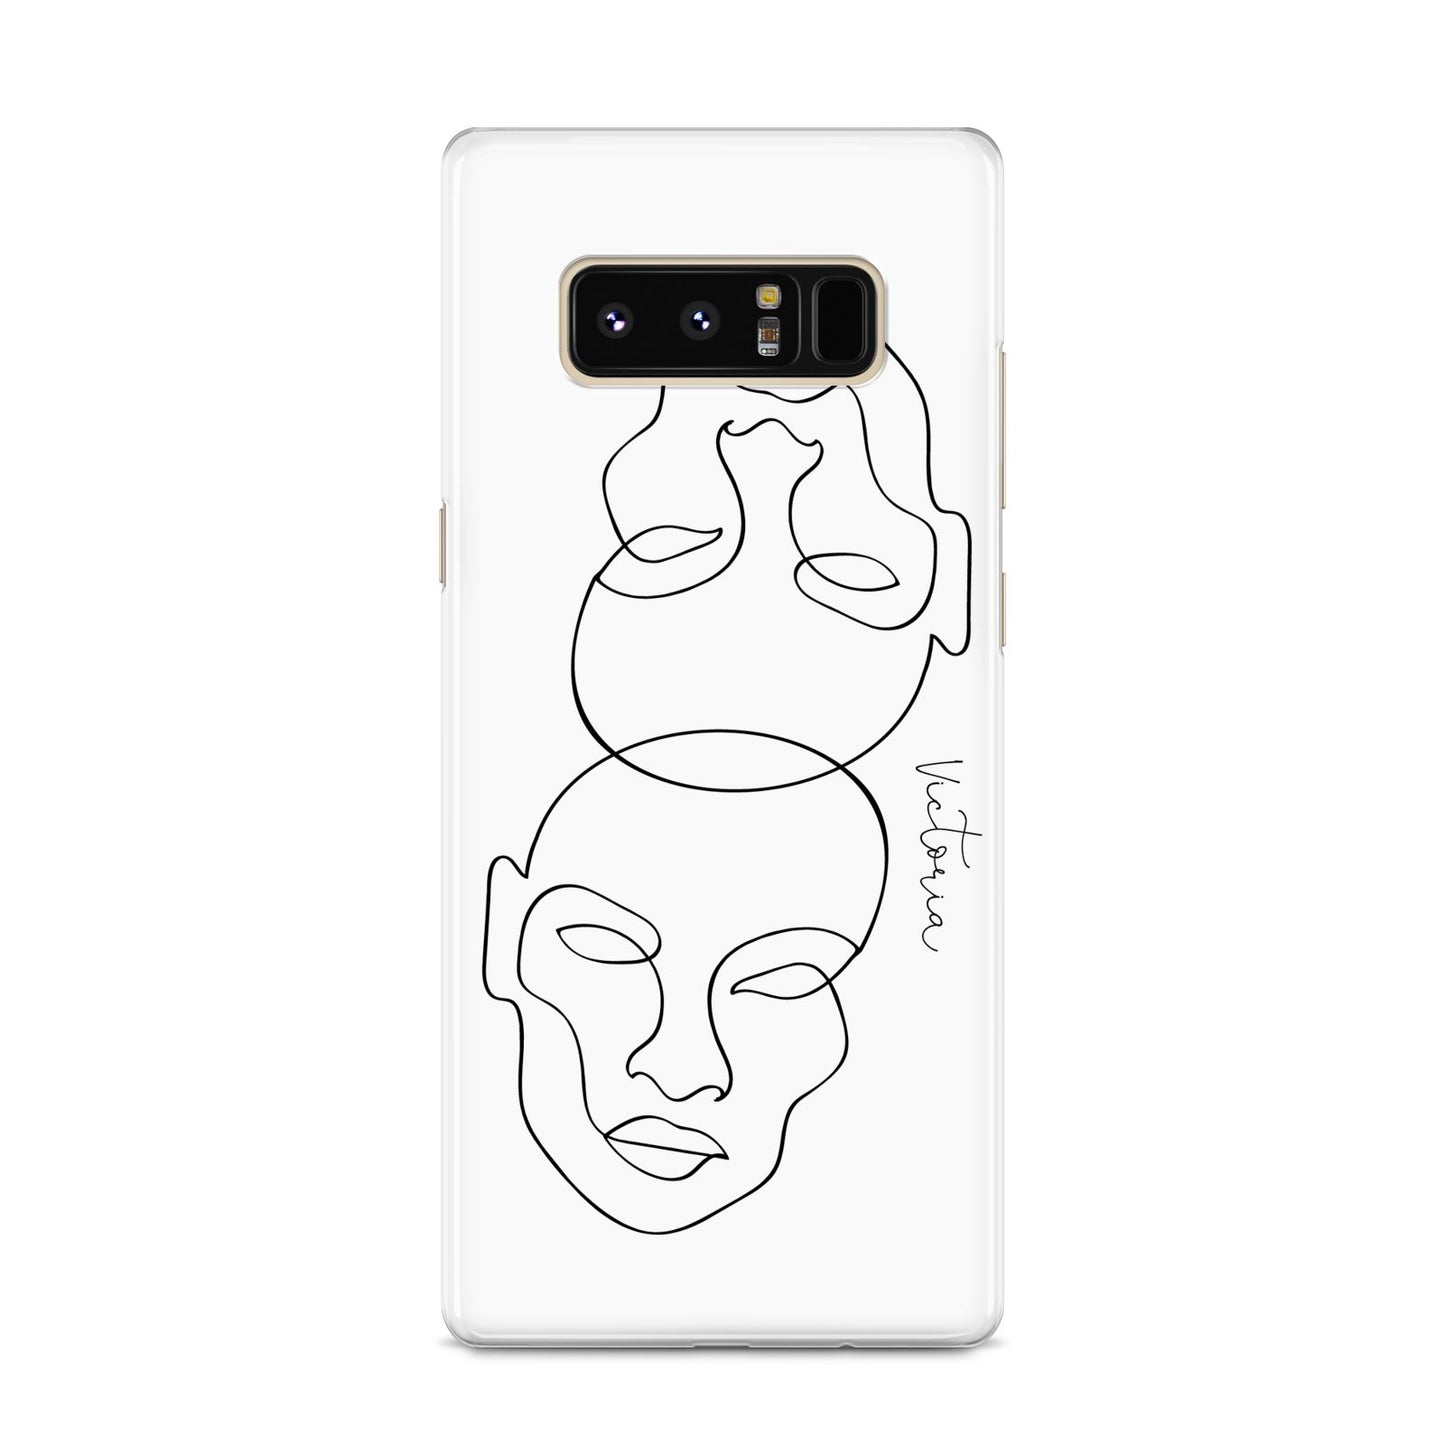 Personalised White Line Art Samsung Galaxy S8 Case